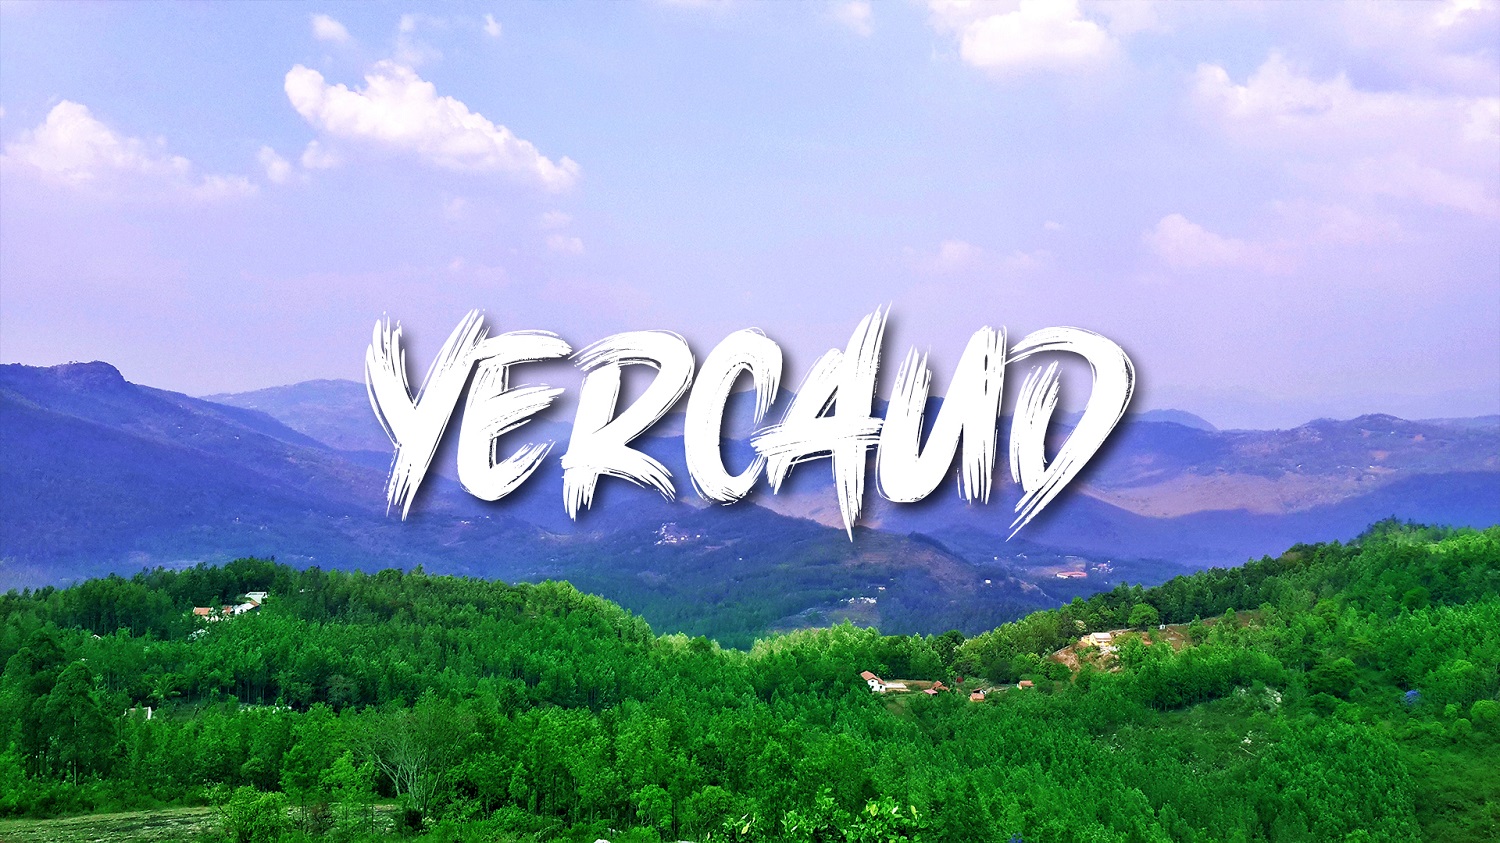 Yercaud - A Chill Station known for Education!